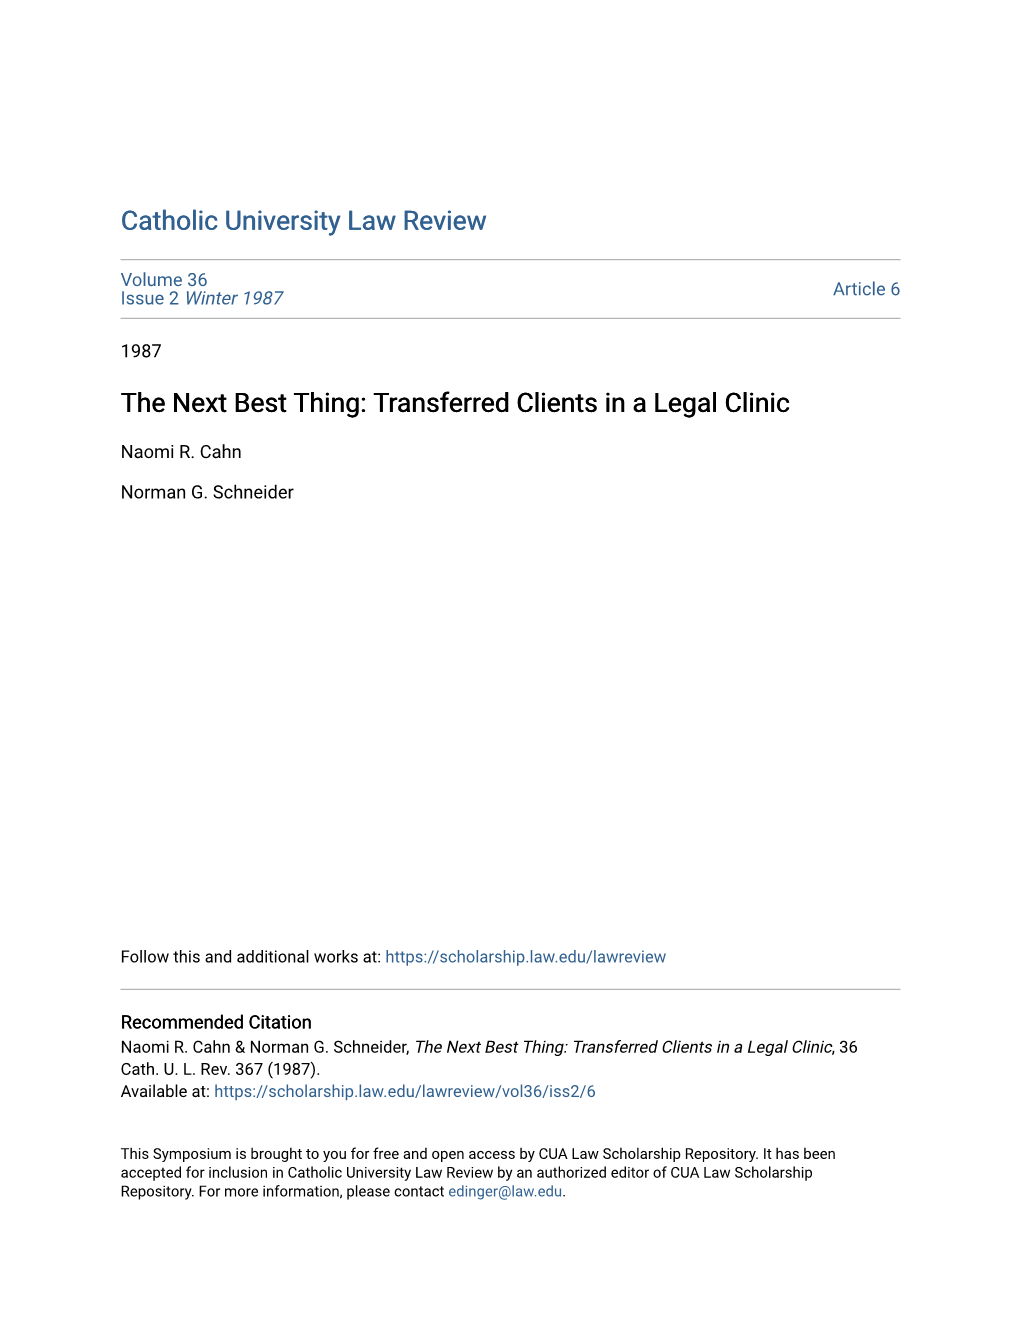 The Next Best Thing: Transferred Clients in a Legal Clinic